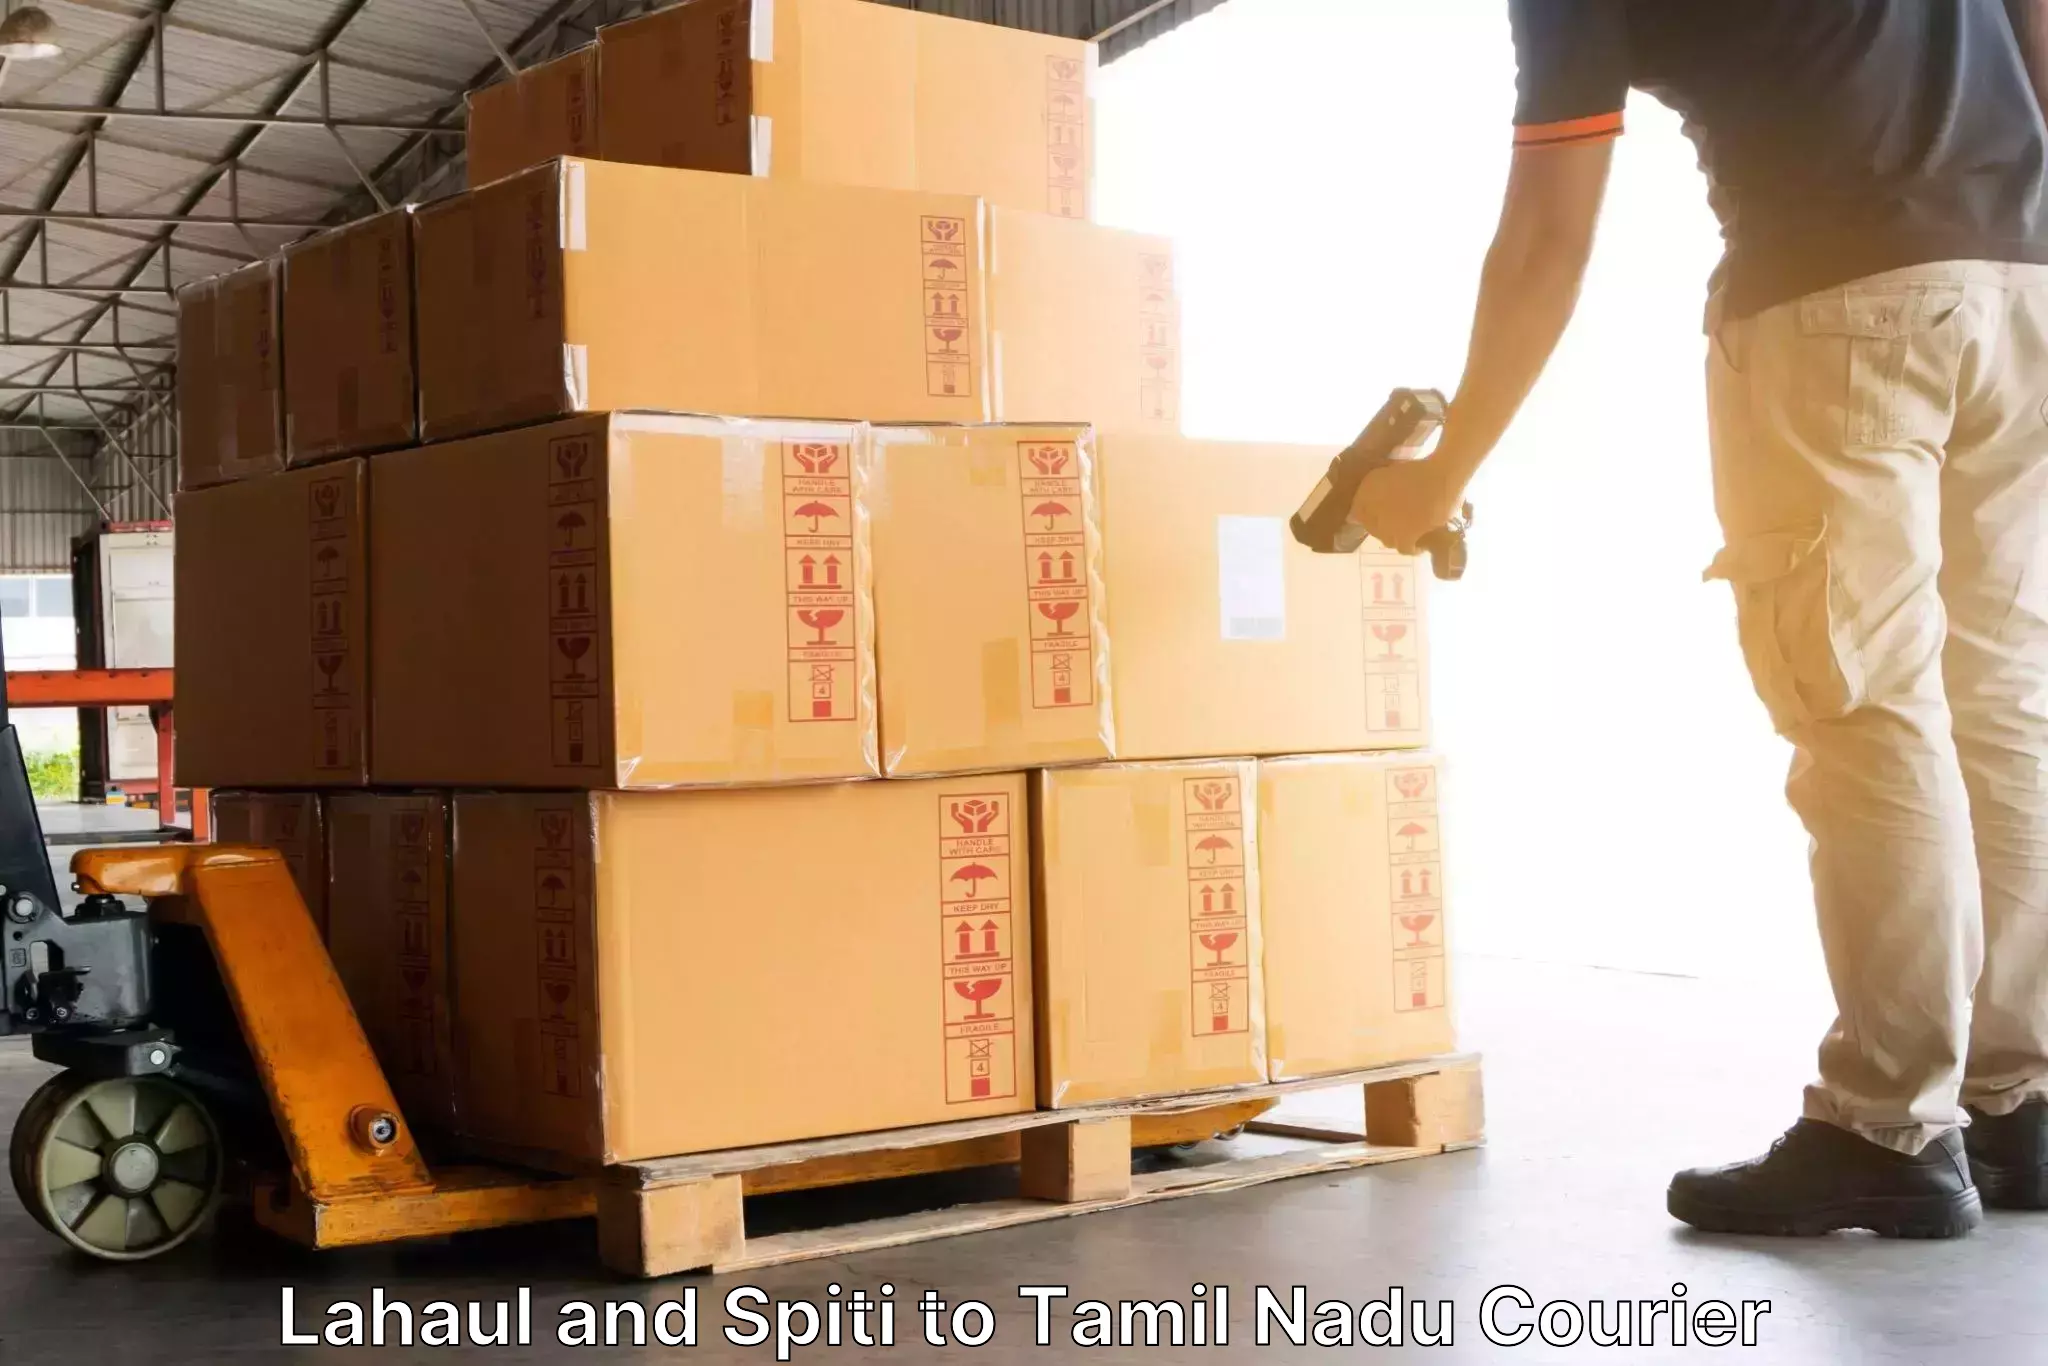 Nationwide parcel services Lahaul and Spiti to Memalur